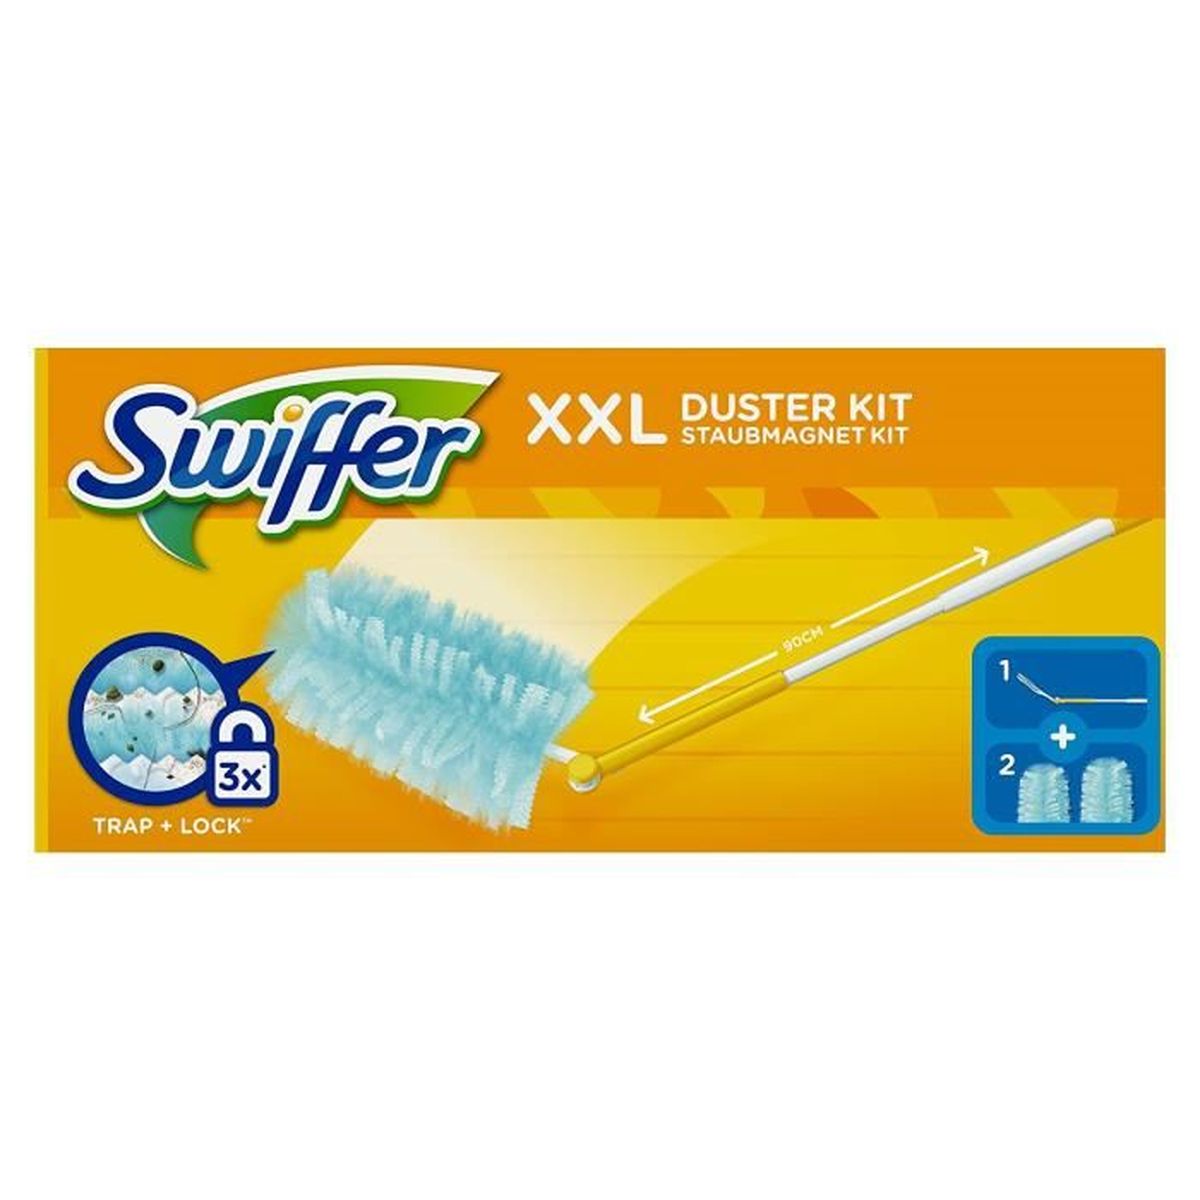 Swiffer Kit Plumeau Duster 2 Recharges Taille Xxl